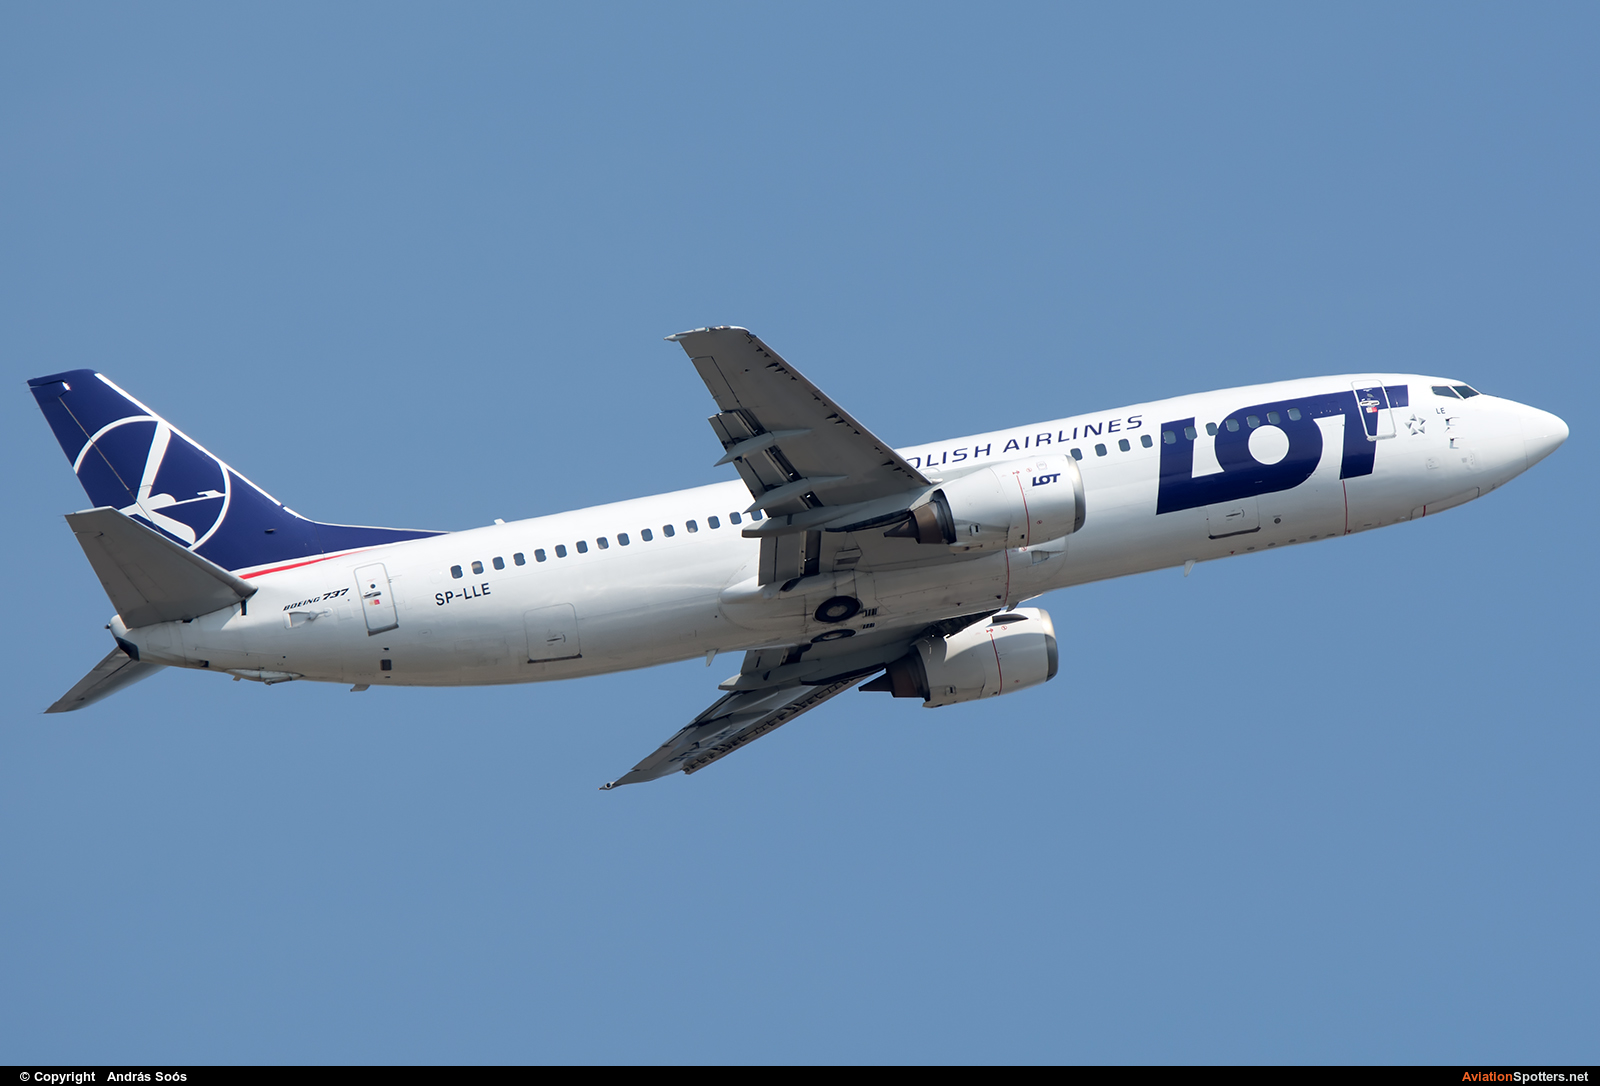 LOT - Polish Airlines  -  737-400  (SP-LLE) By András Soós (sas1965)